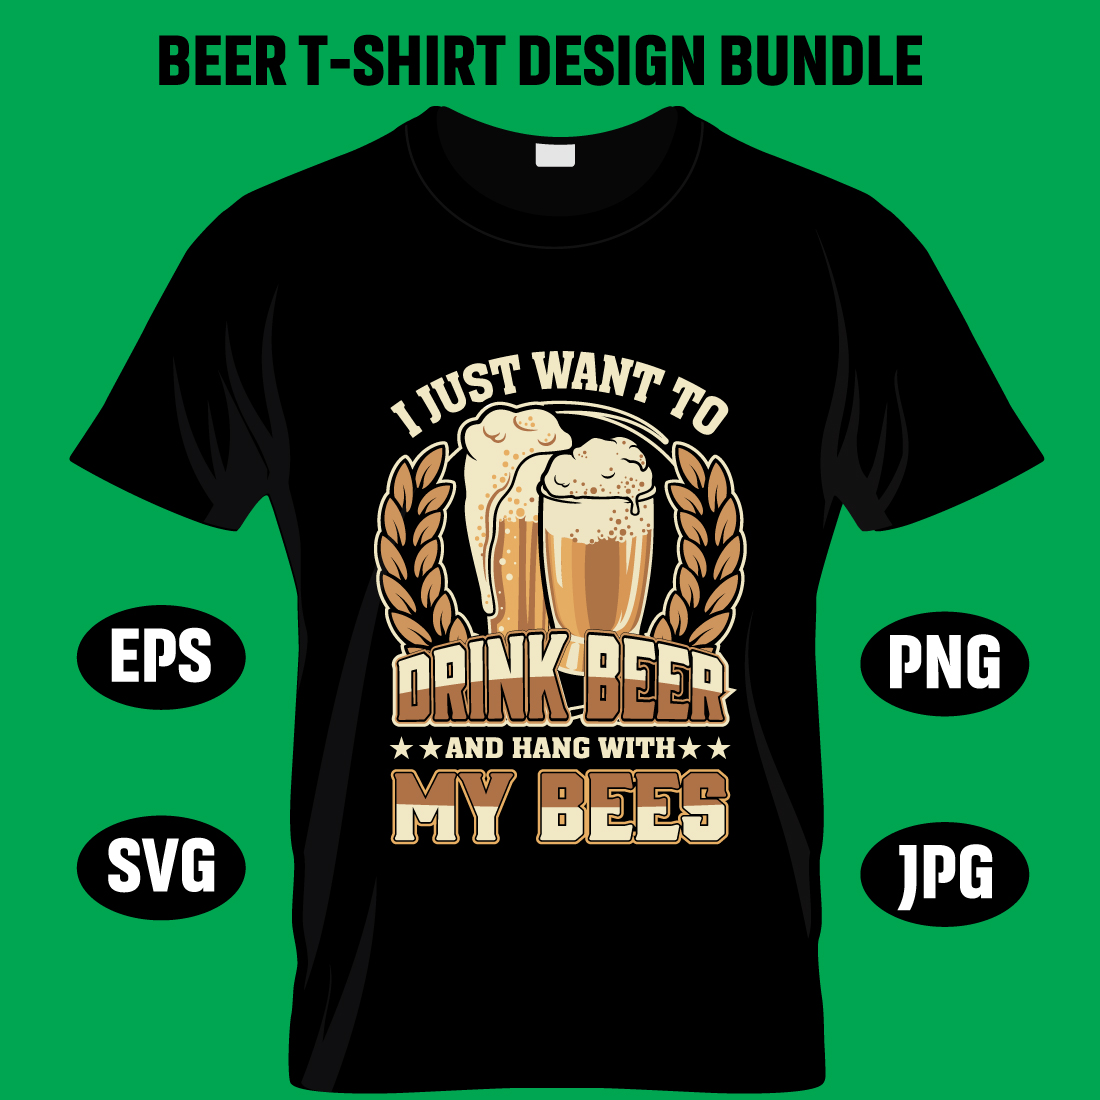 T - shirt design with the words i just want to drink beer and hang.